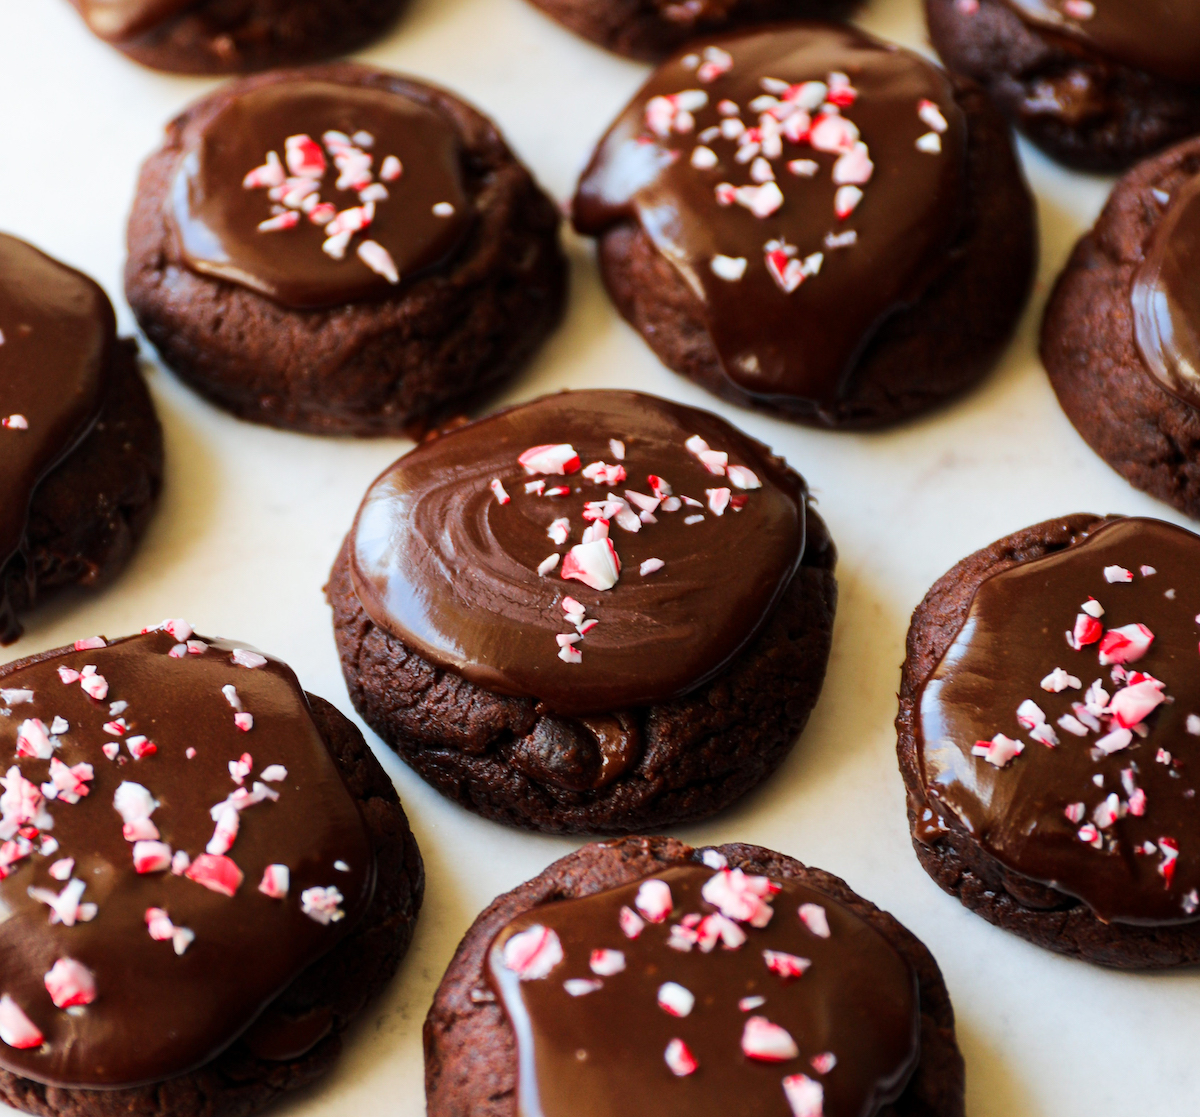 A side view of peppermint chocolate cookies that are vegan with crushed candy canes on top.